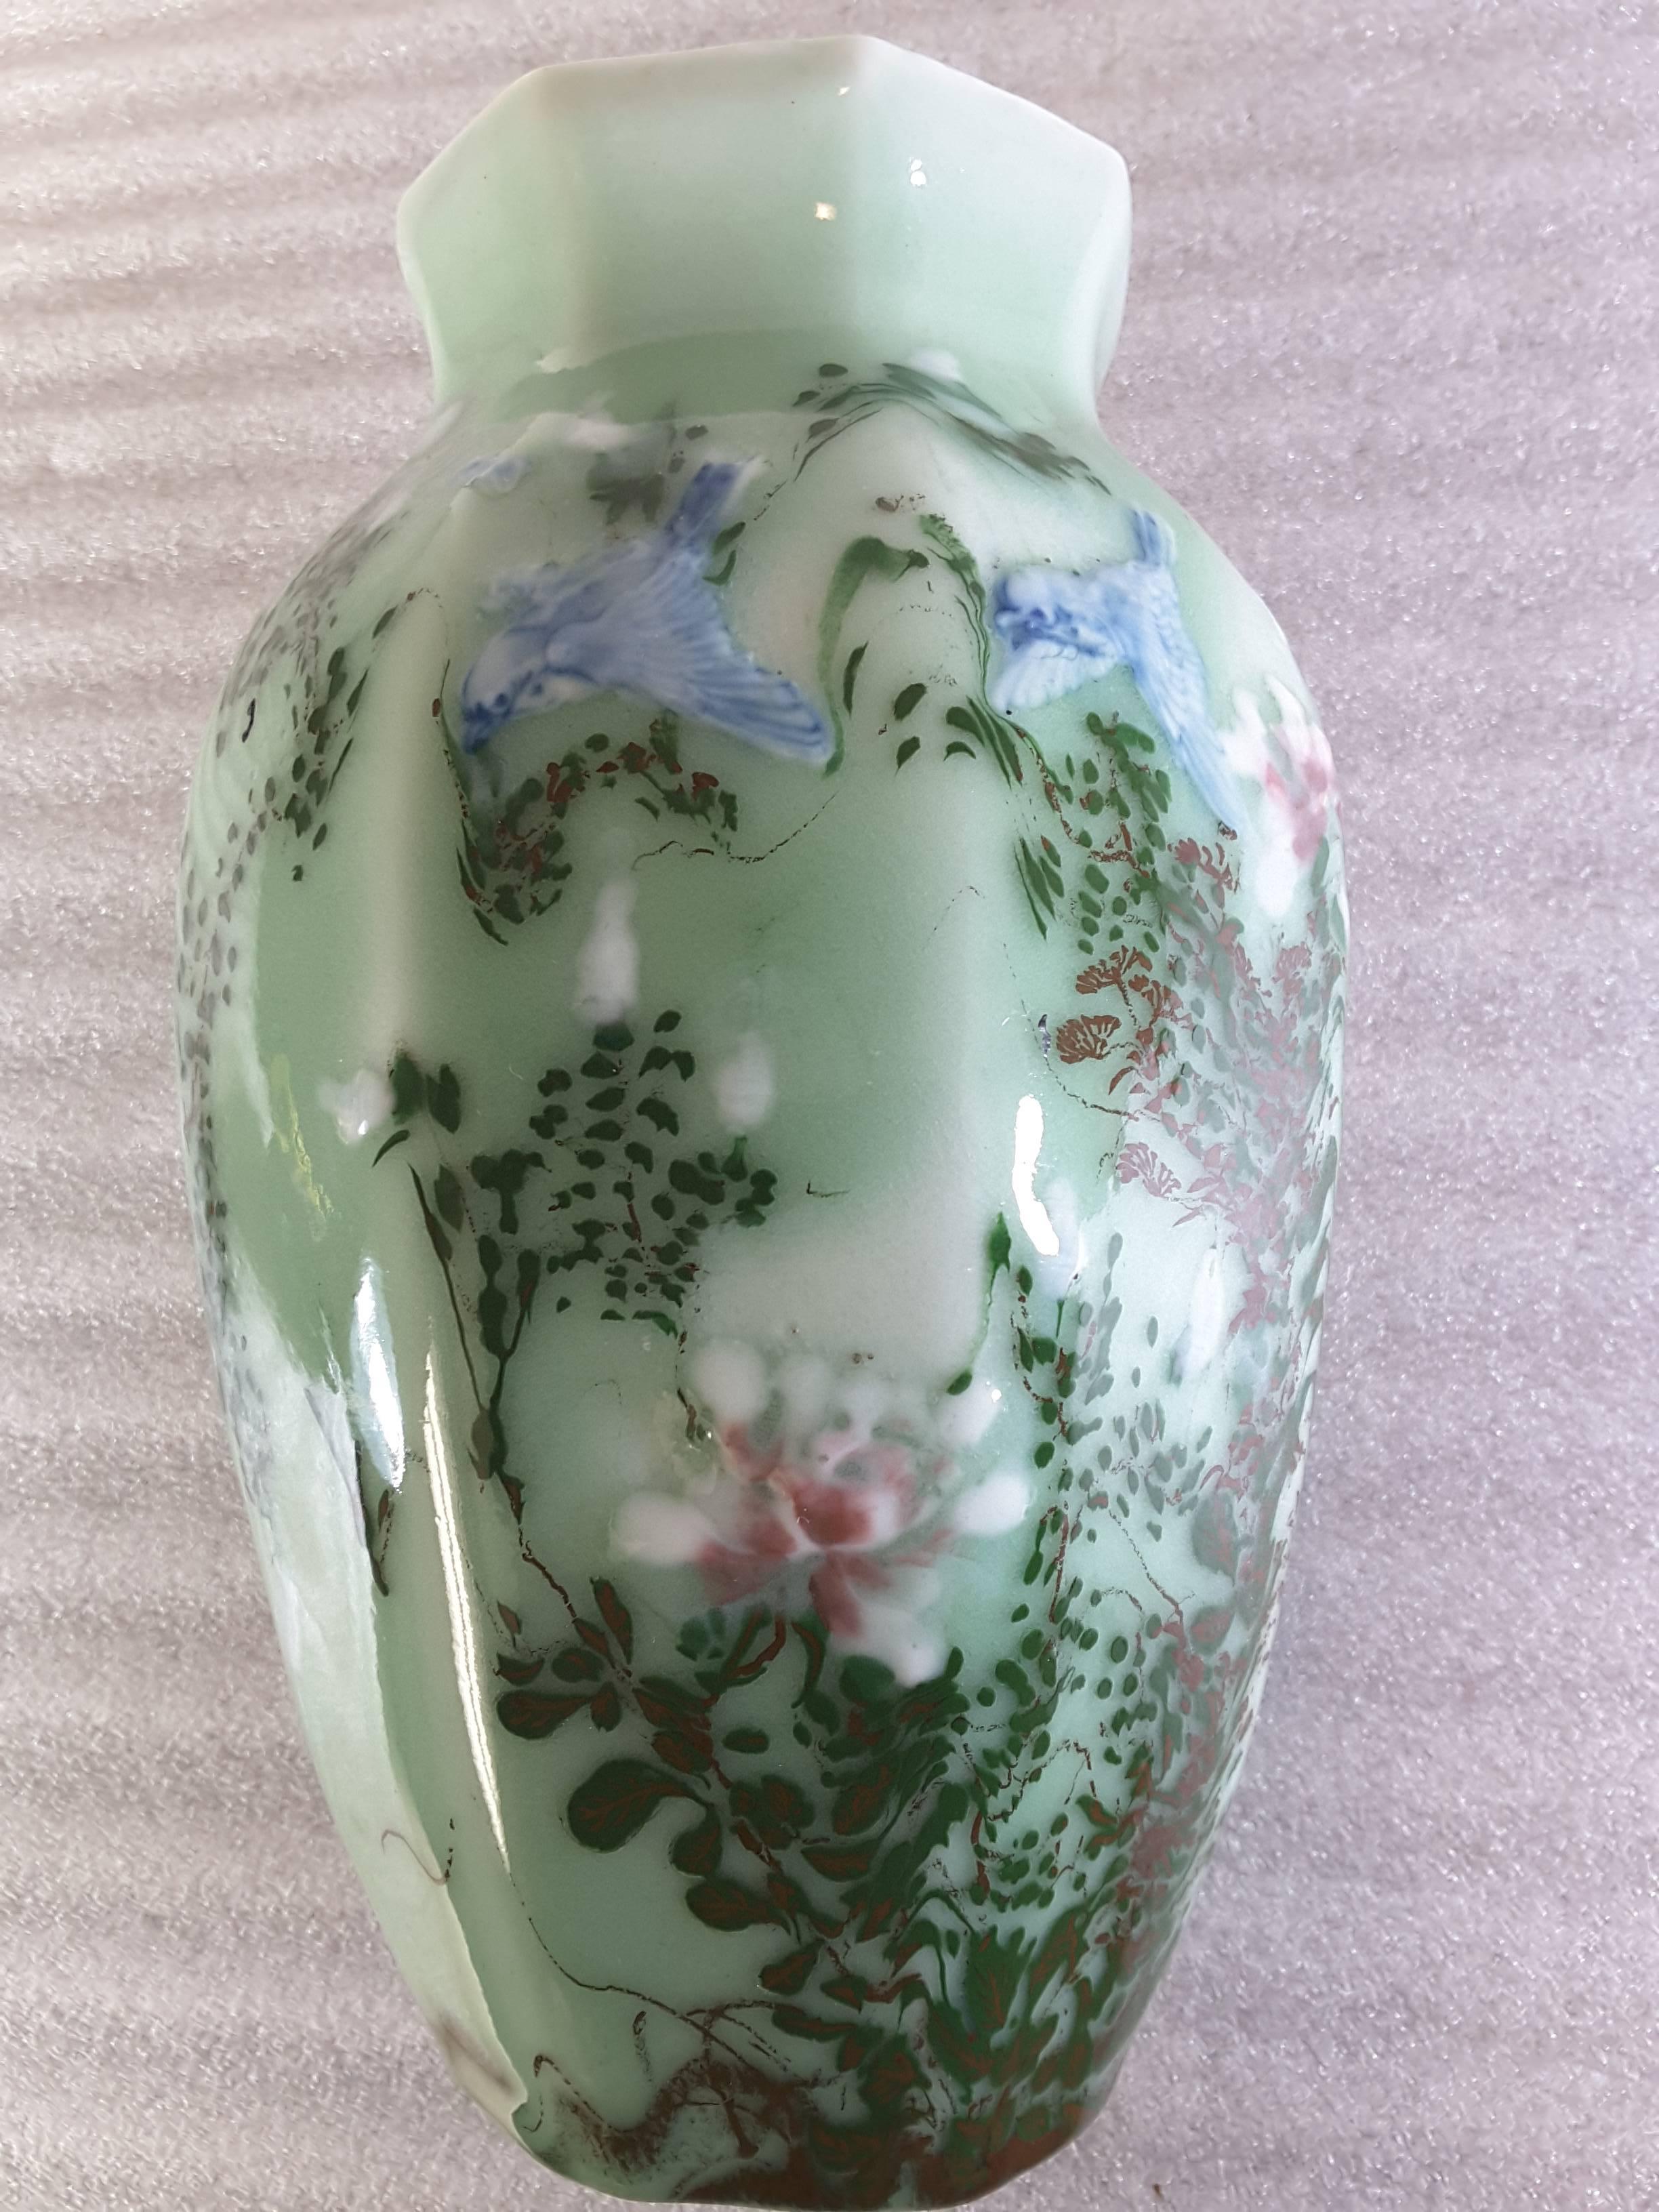 Chinese celadon blue bird and floral decorated hexagon vase, circa 1900. Nicely decorated with Blue birds and multicolored foliage on a light celadon light green colored background. The vase measures 9 3/8